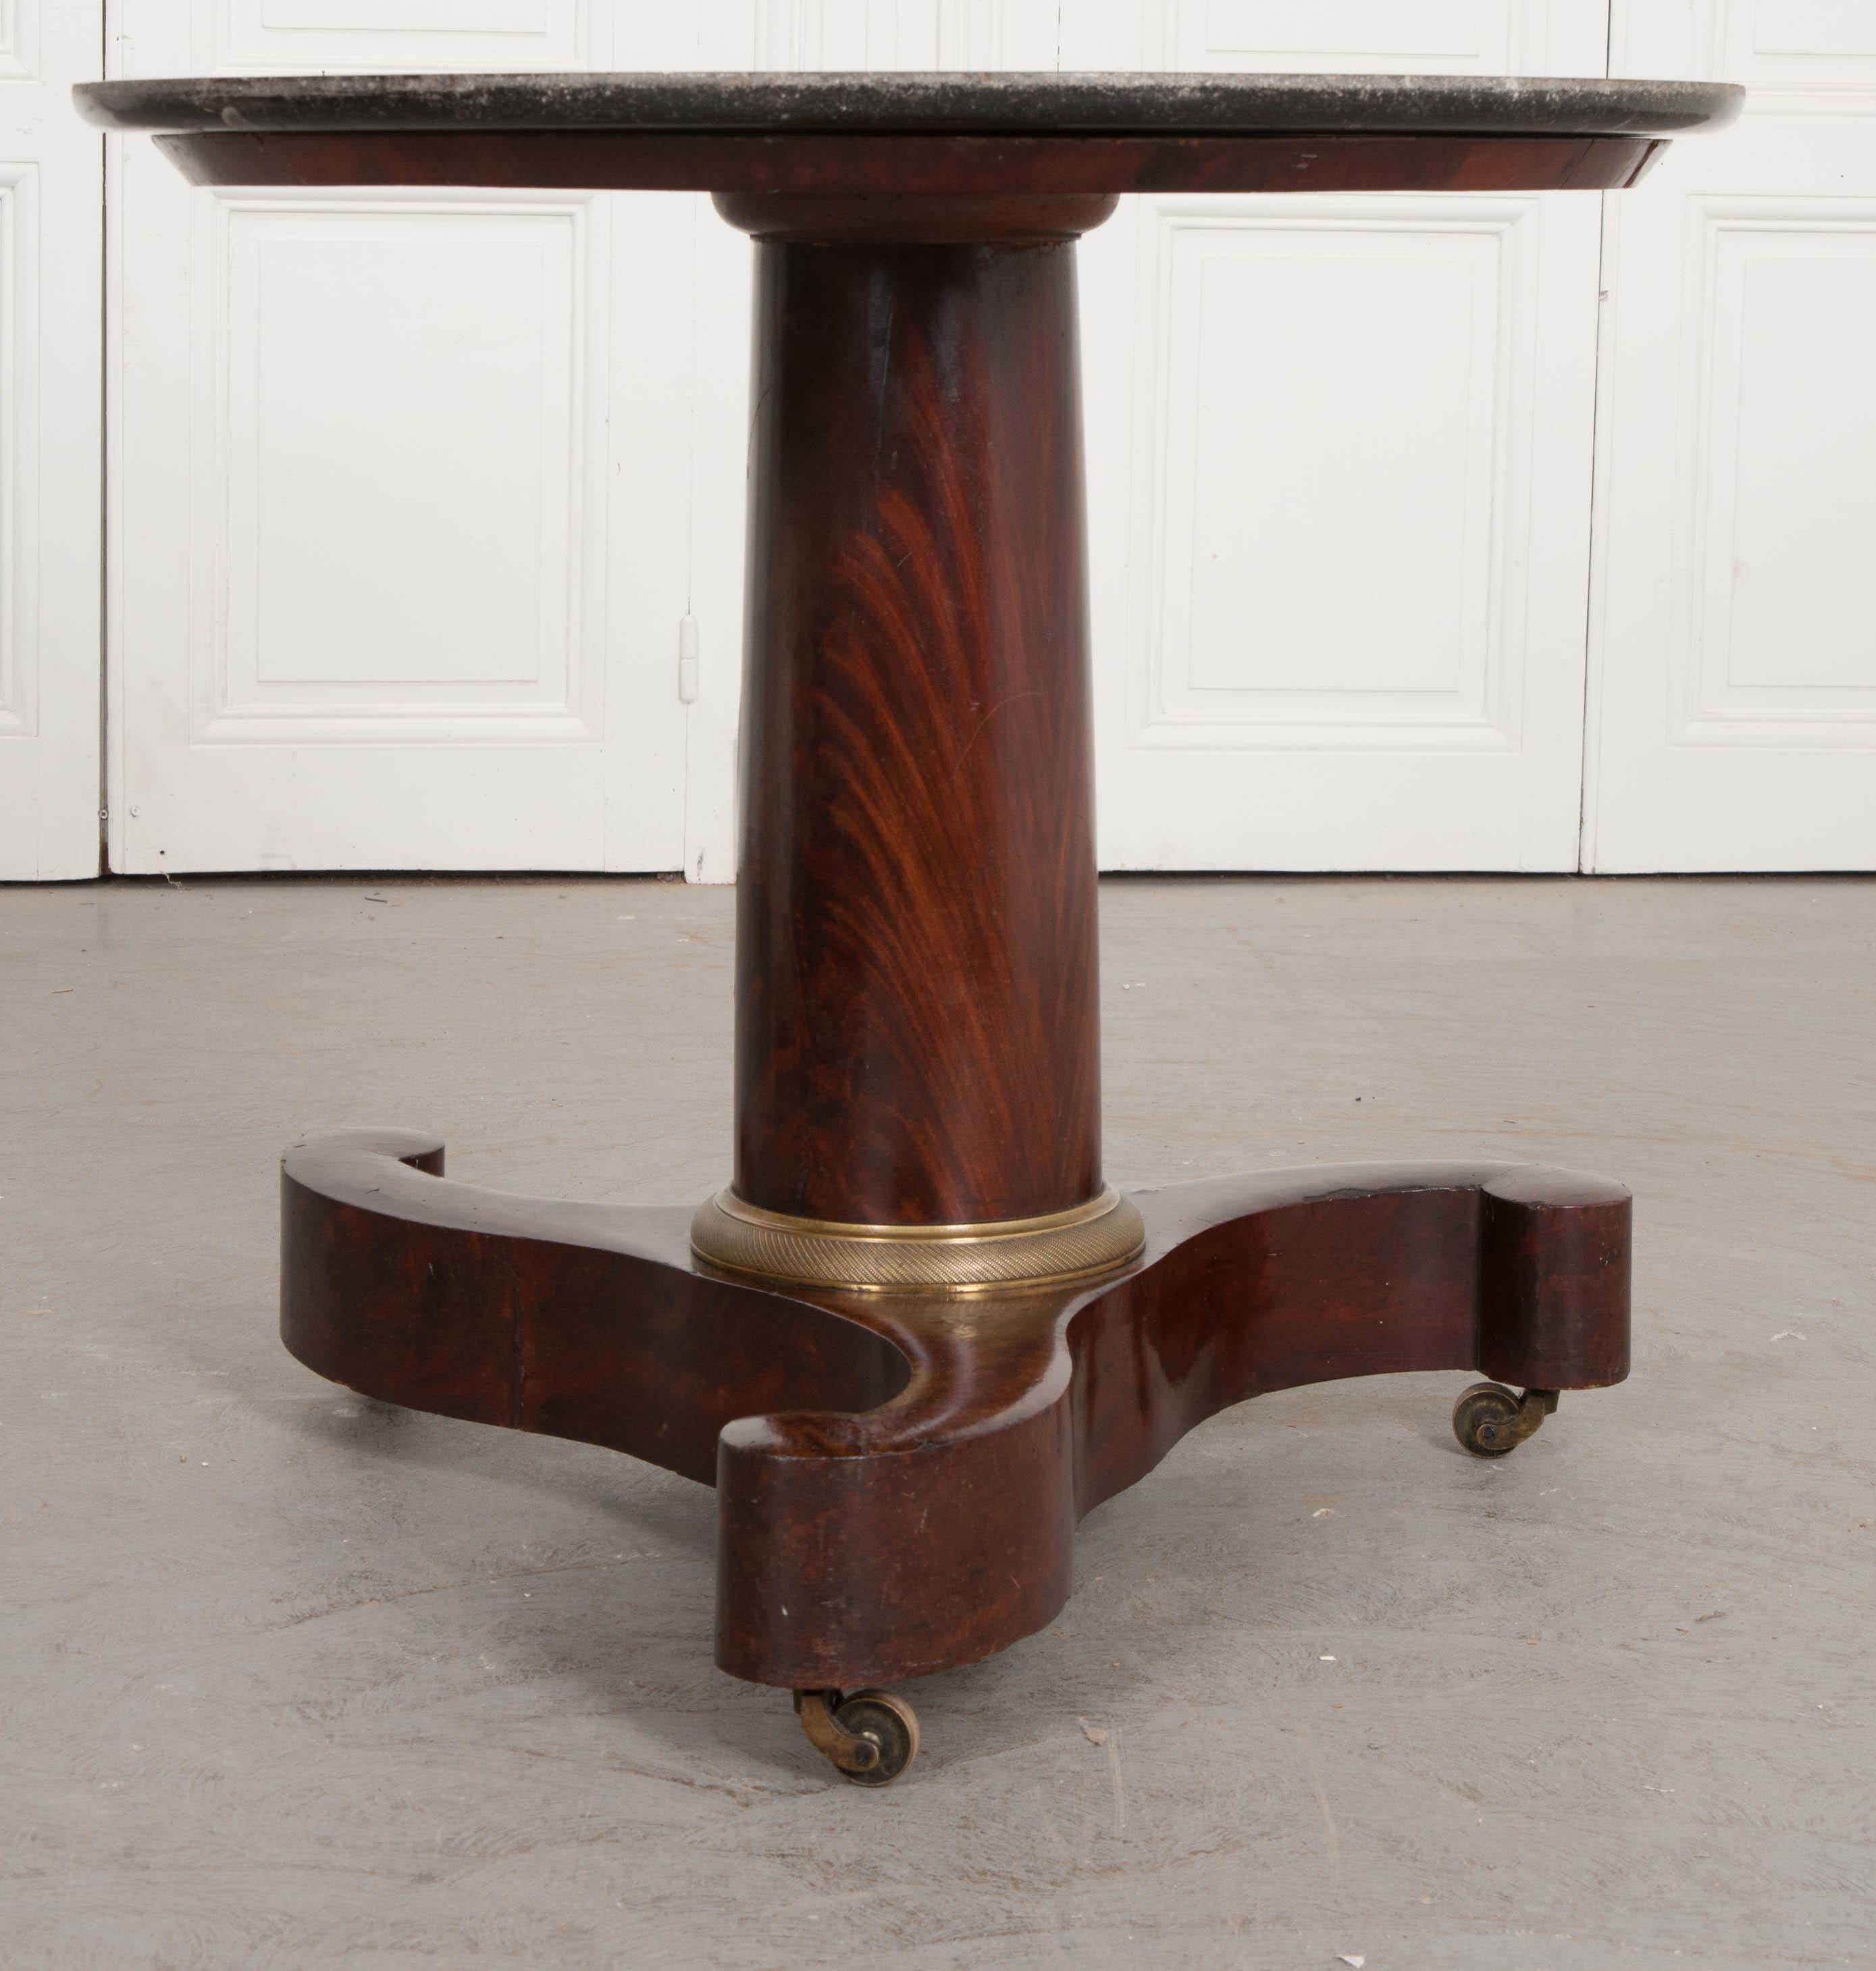 A handsome mahogany Empire pedestal table, made in France, circa 1870. The table has a round, black fossil marble top that is slightly welled and in fabulous antique condition. The top is supported by a thick pedestal that connects it to the styled